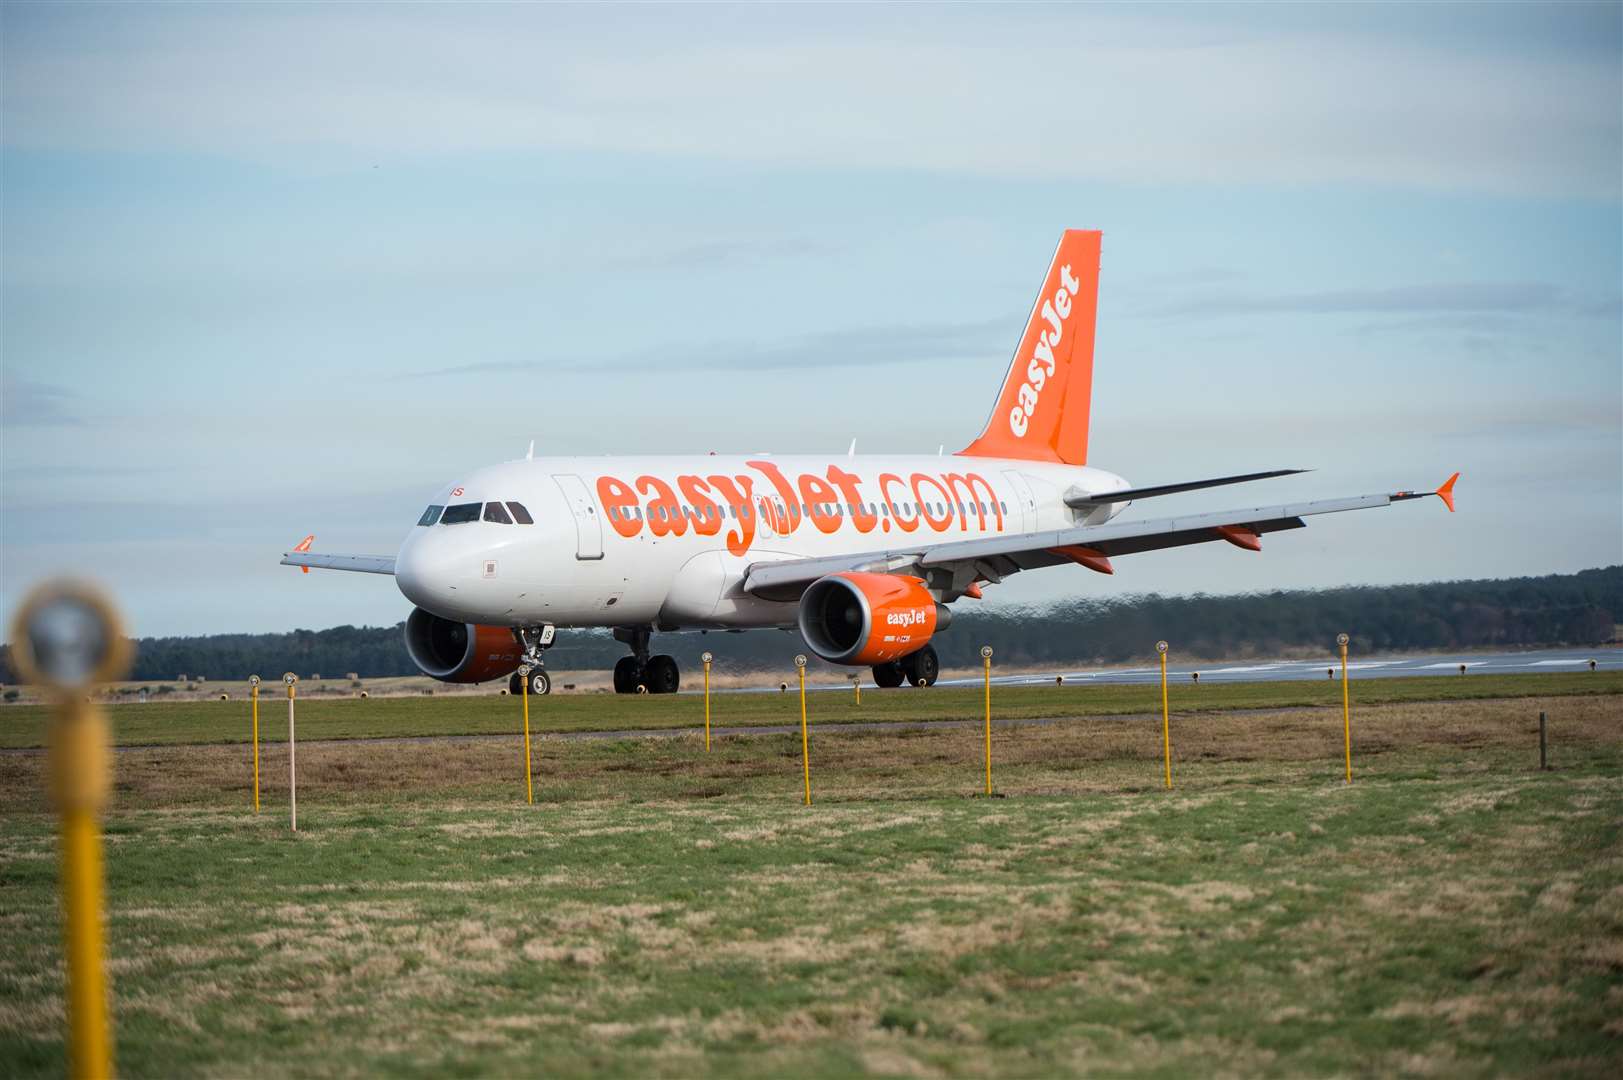 Easy Jet is set to resume flights to Gatwick from Aberdeen in 2021.